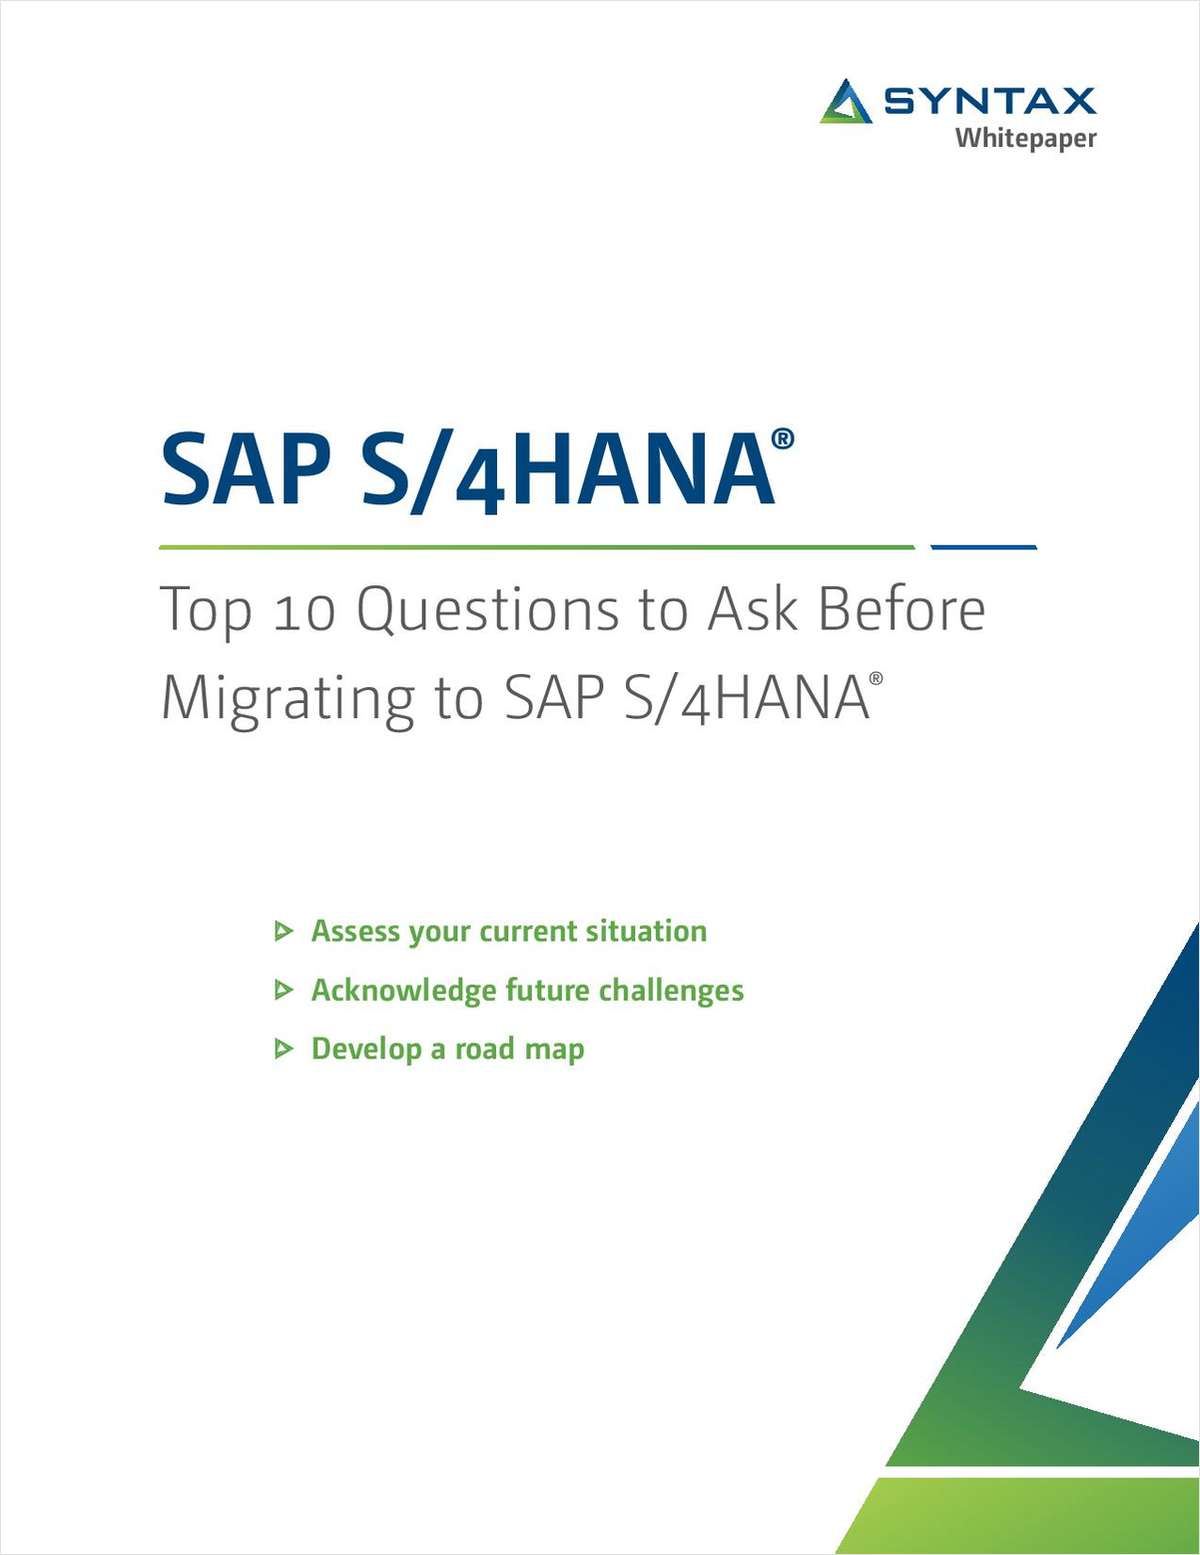 Top 10 Questions to Ask Before Migrating to SAP S/4HANA